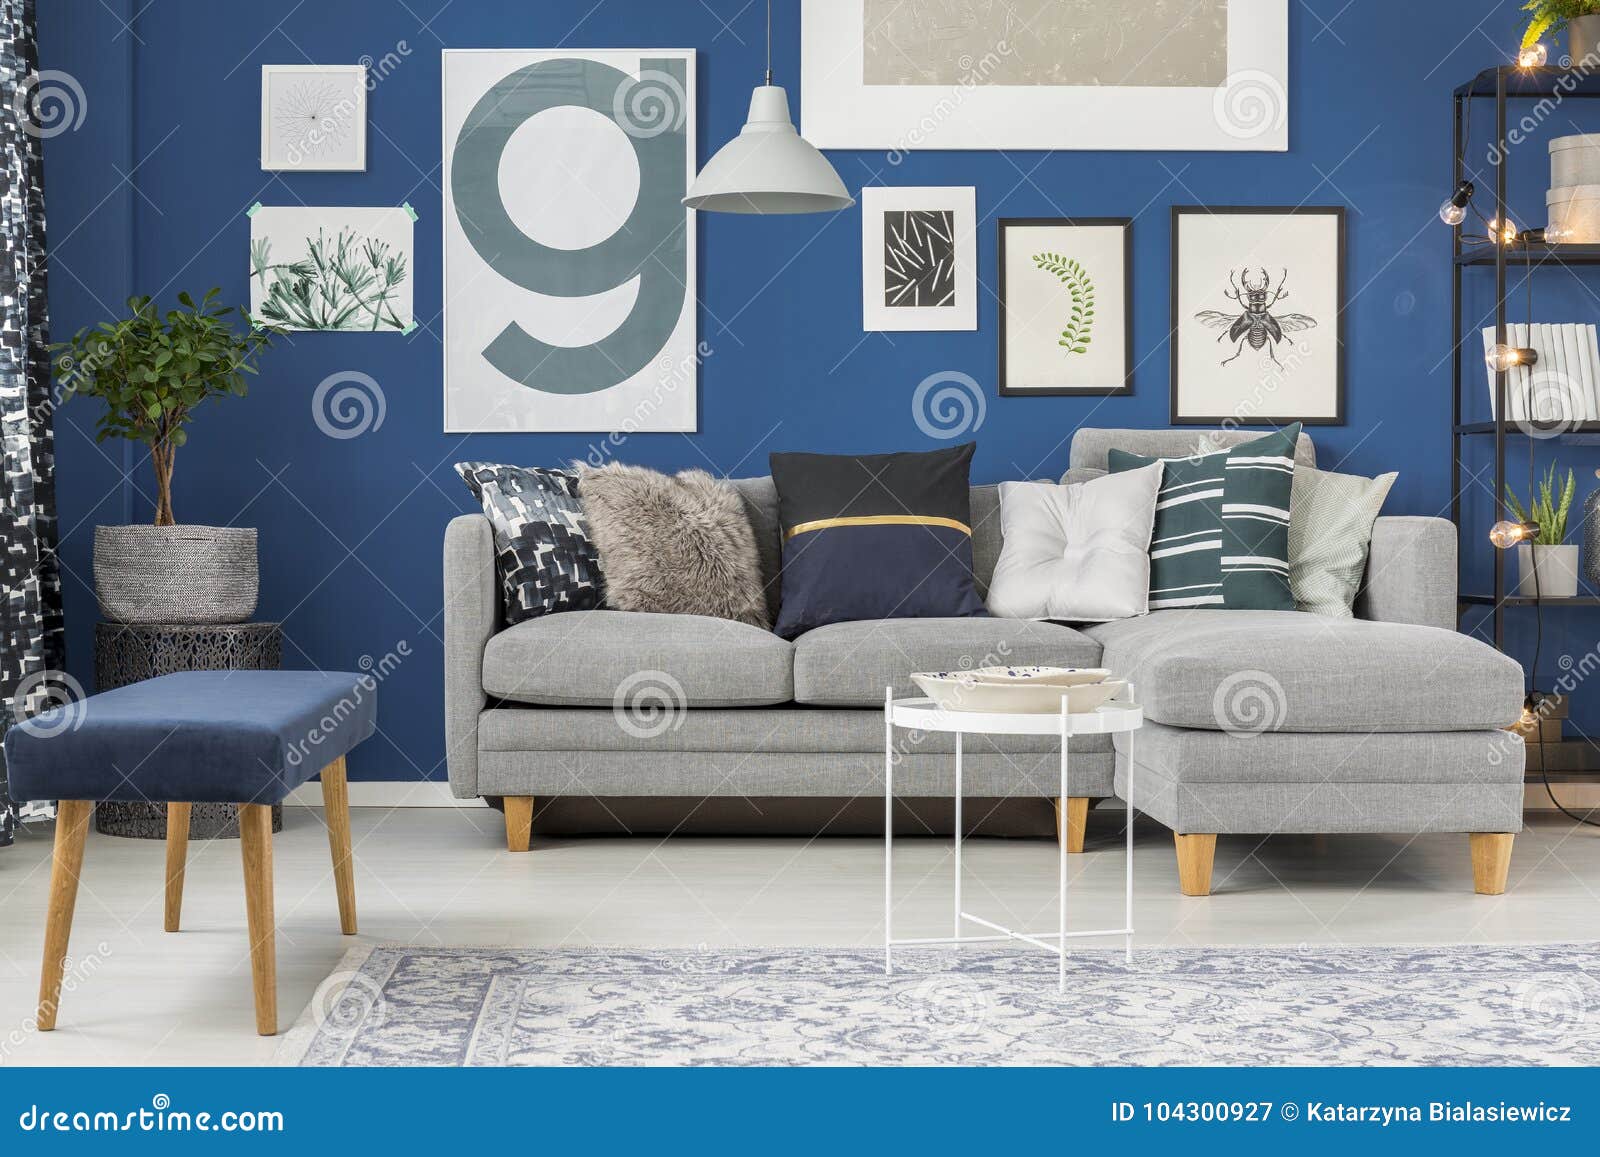 Sapphire Room With Sofa Stock Image Image Of Flat Openwork